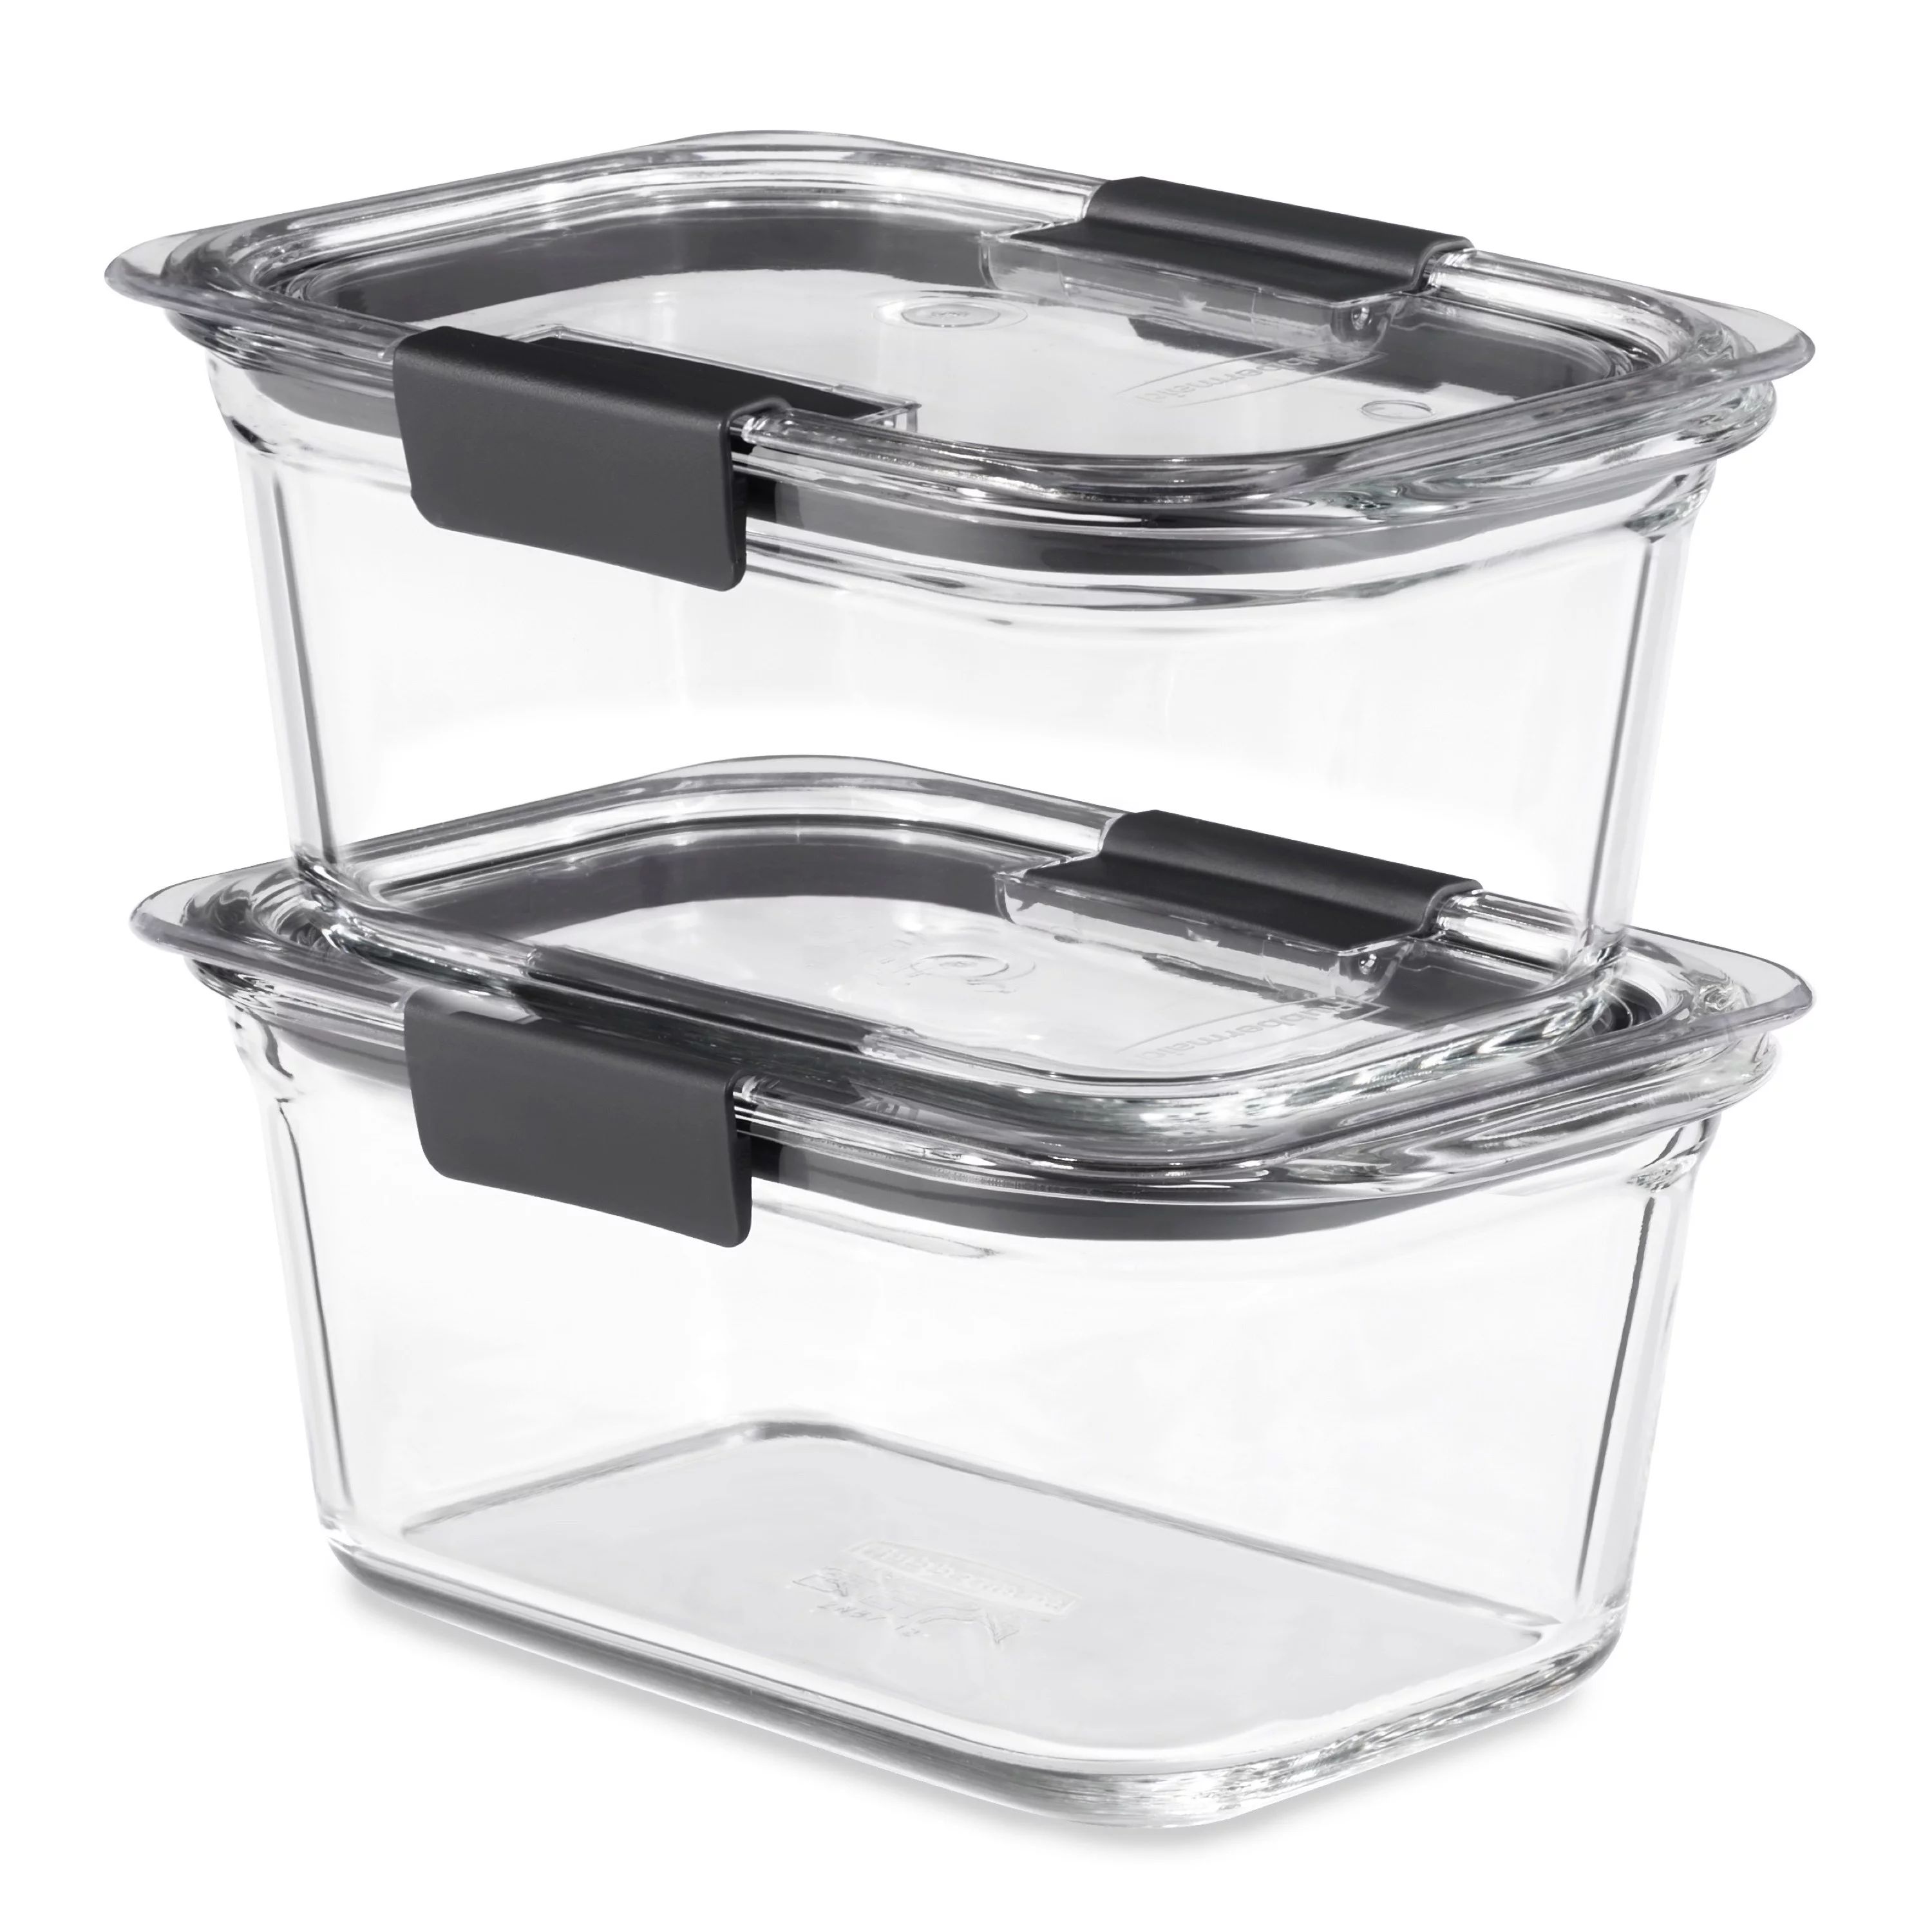 Rubbermaid 4.7 Cup Brilliance Glass Food Storage Containers, 2-Pack with Lids, BPA Free and Leak ... | Walmart (US)